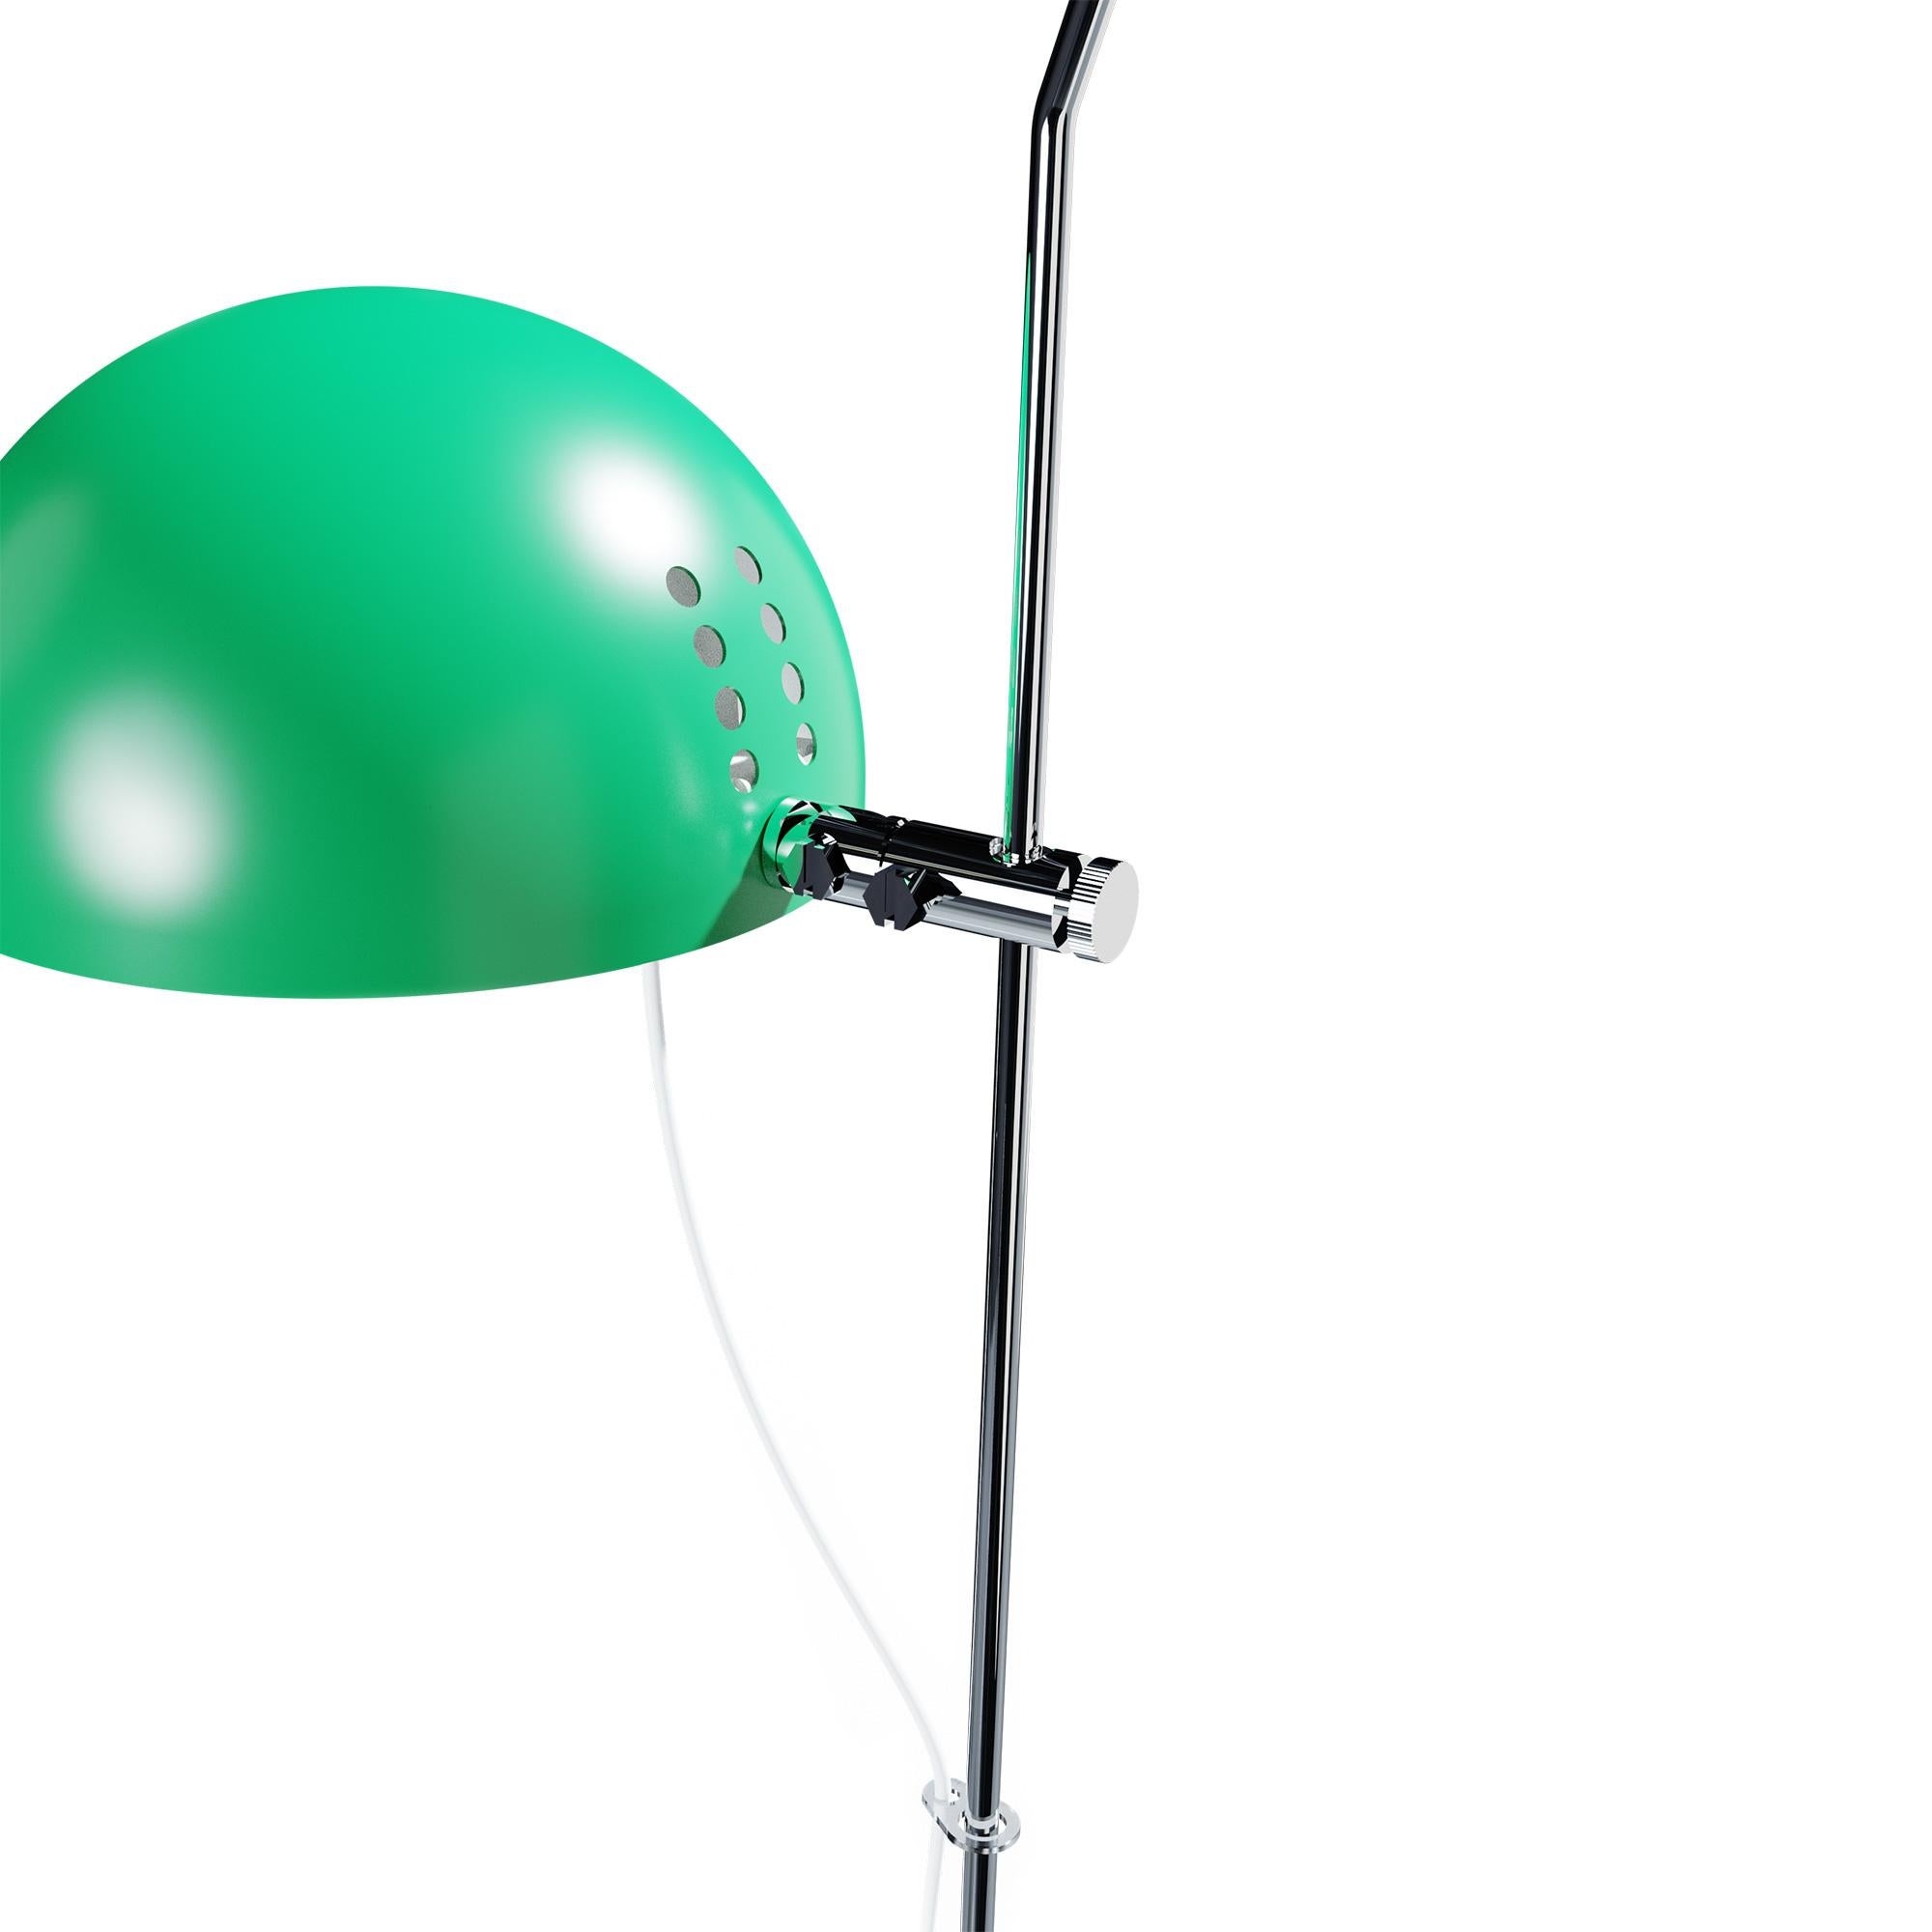 Alain Richard 'A21' desk lamp in green for Disderot.

Executed in green painted metal, this newly produced numbered edition with included certificate of authenticity is made in France by Disderot with many of the same small-scale manufacturing